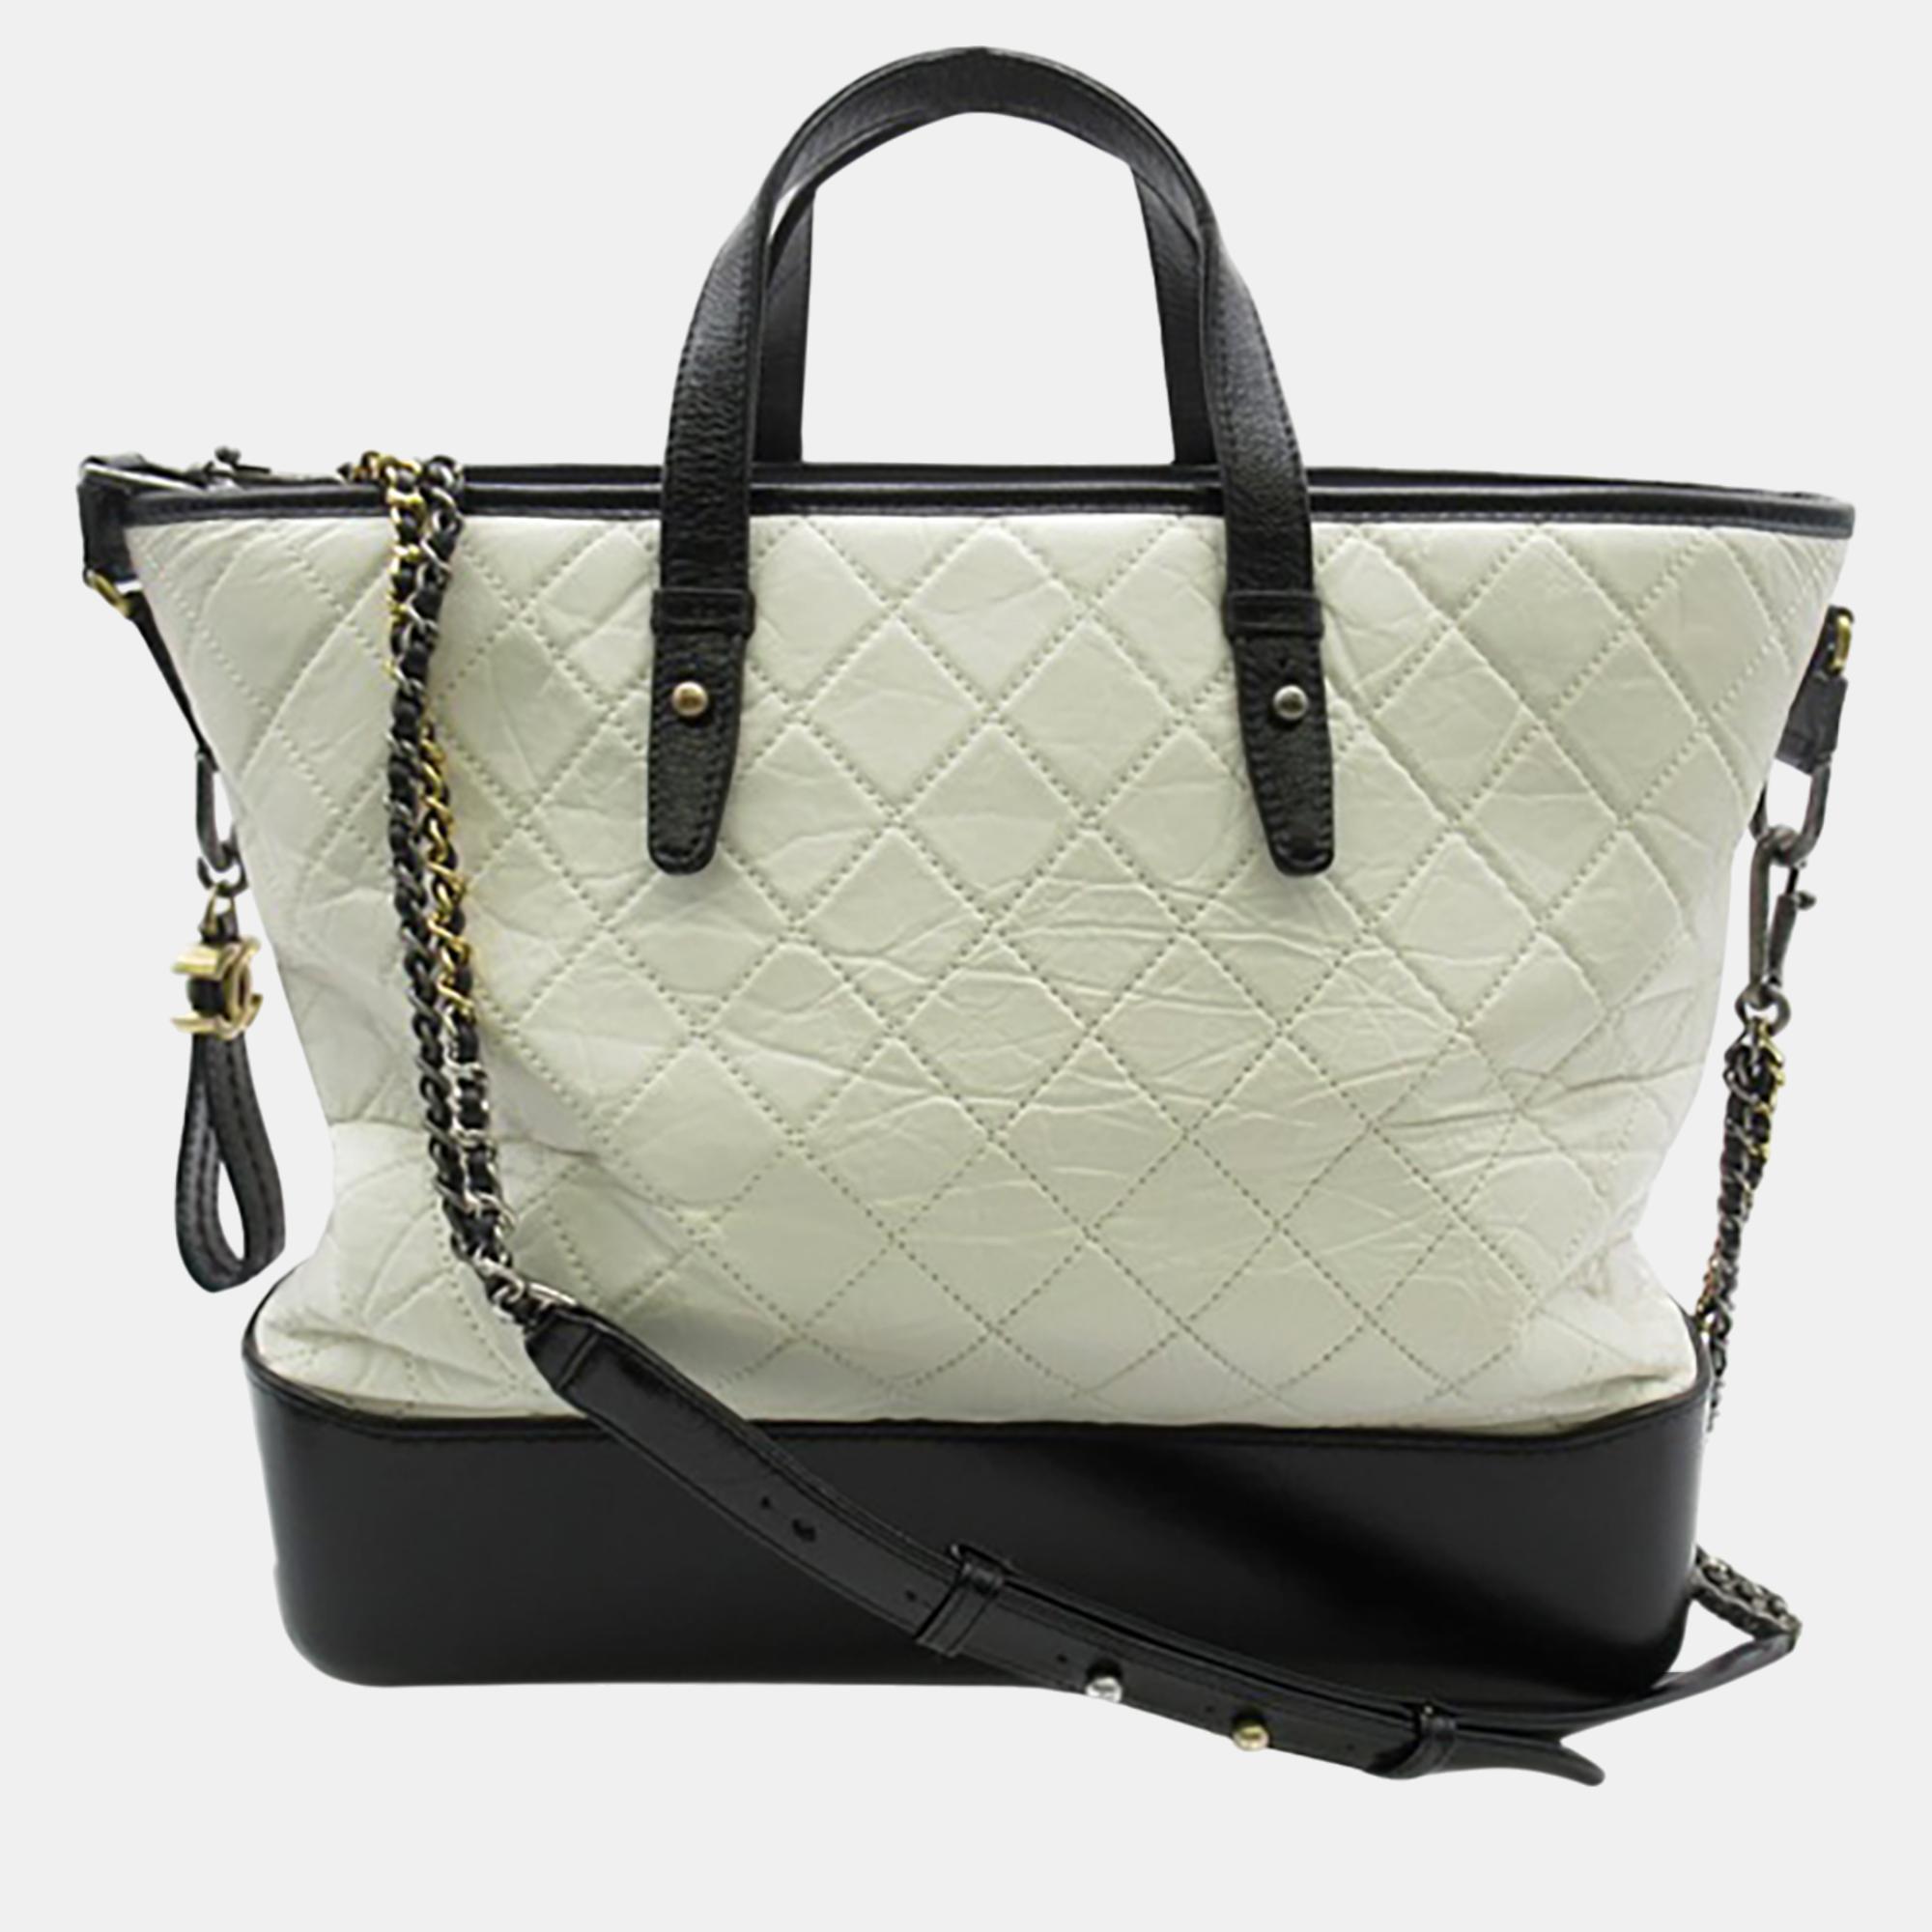 Chanel white/black large aged calfskin gabrielle shopping tote